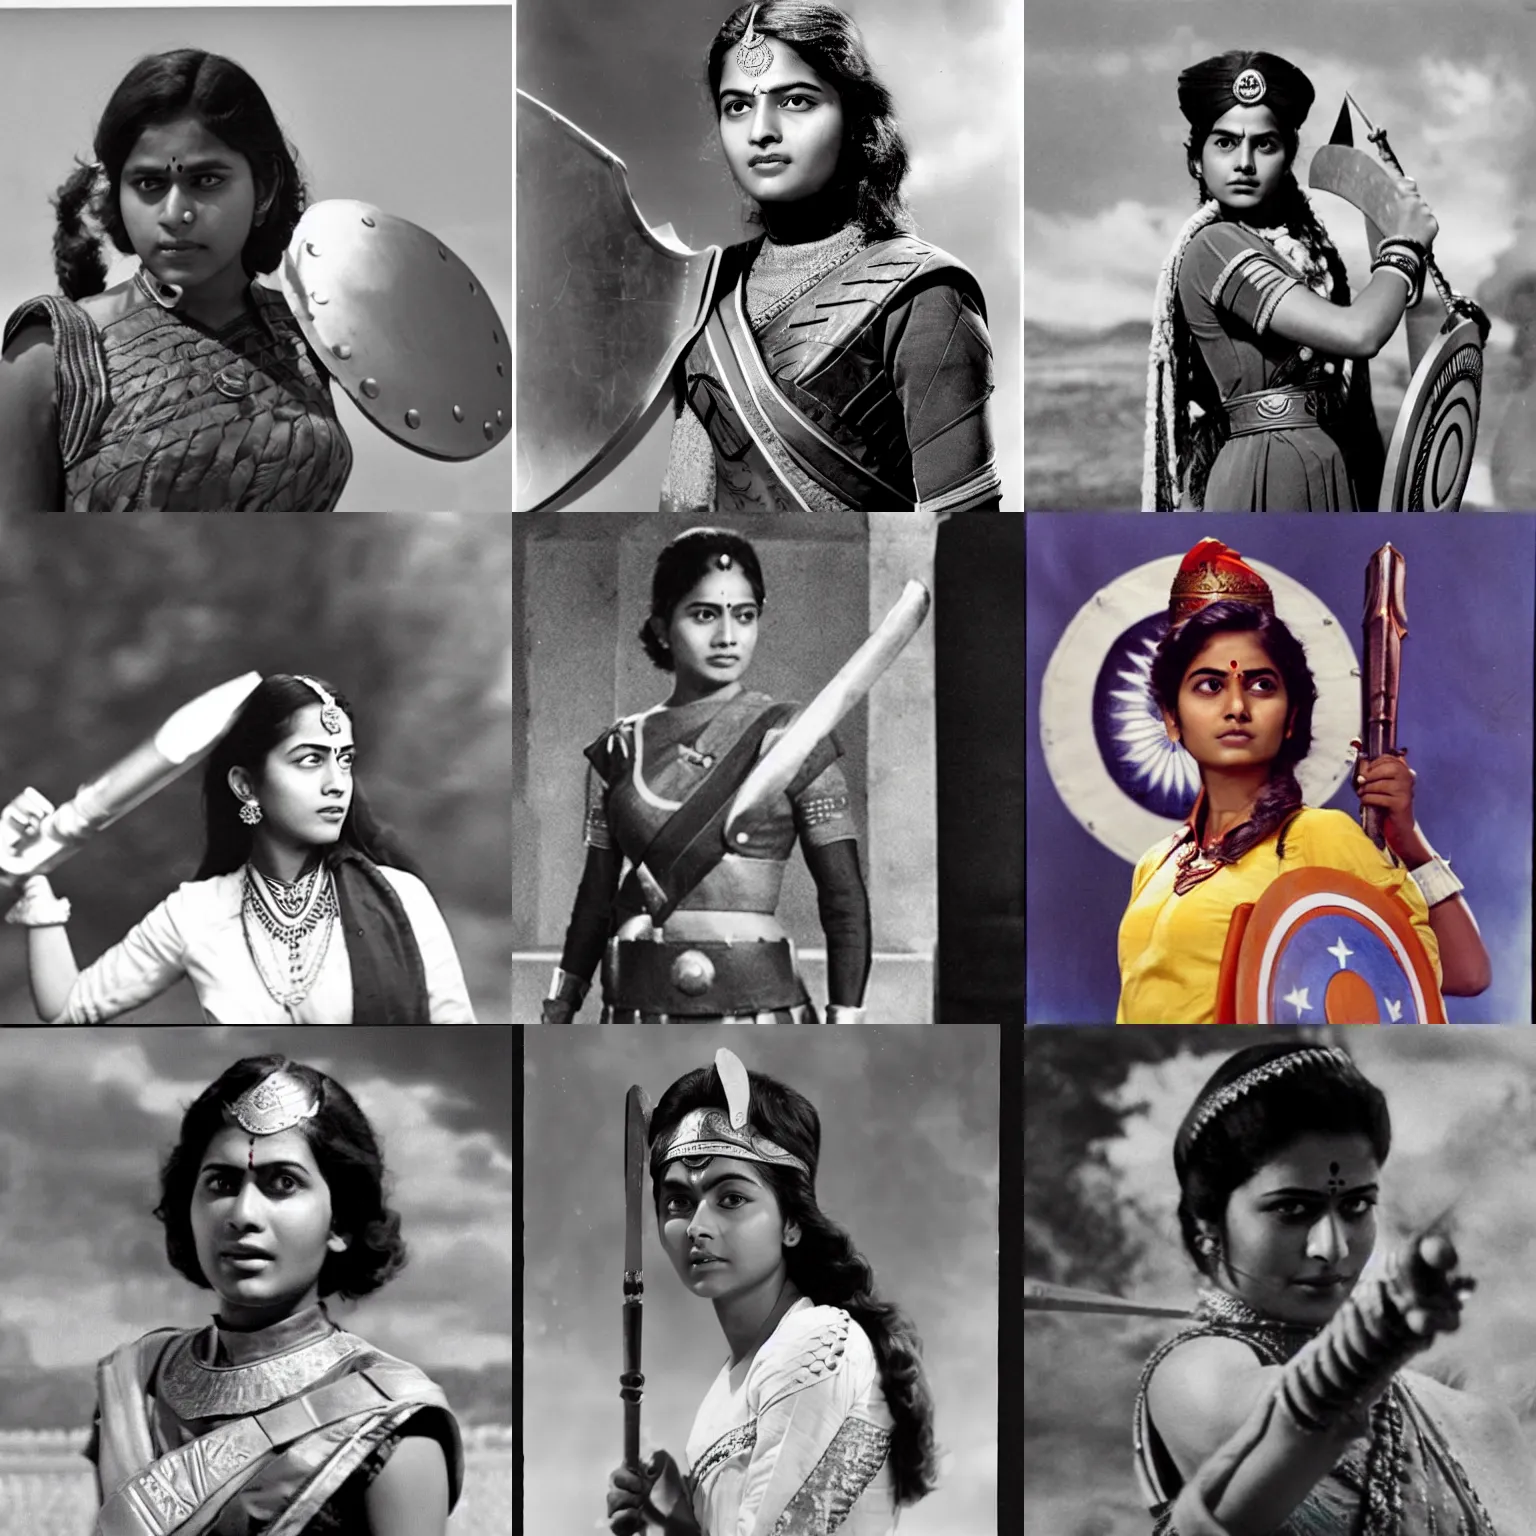 Prompt: A young Indian woman as captain India, holding a shield, film still from The Avengers